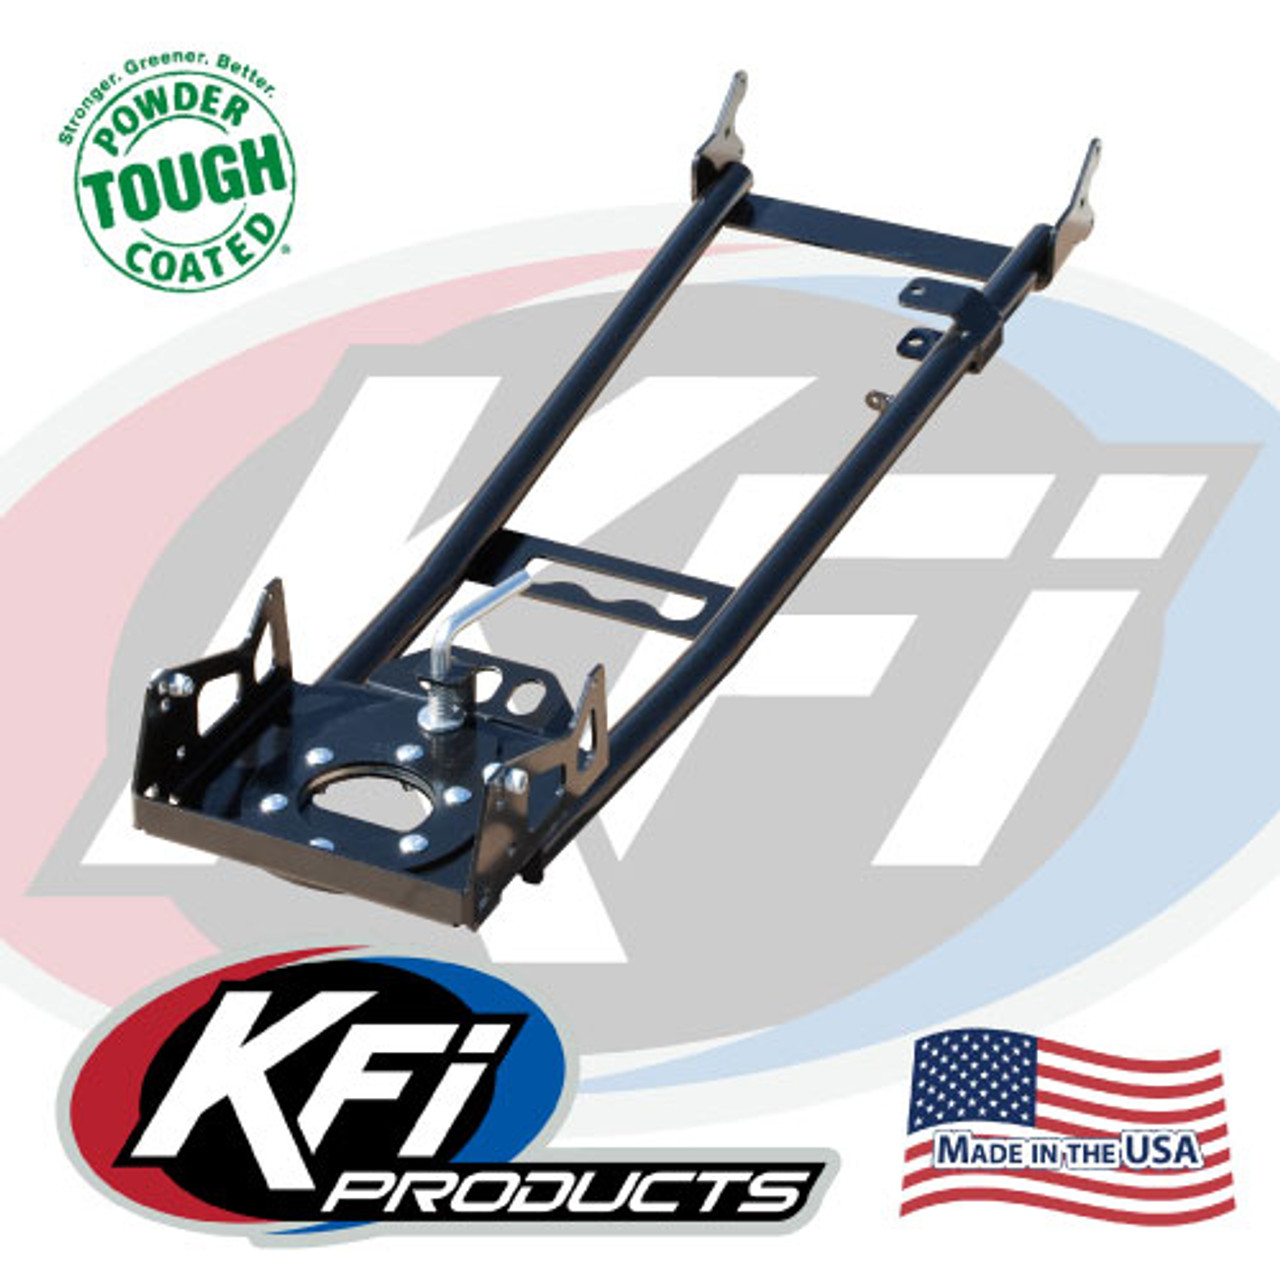 KFI Pro-Poly Series 66" Plow System For Honda